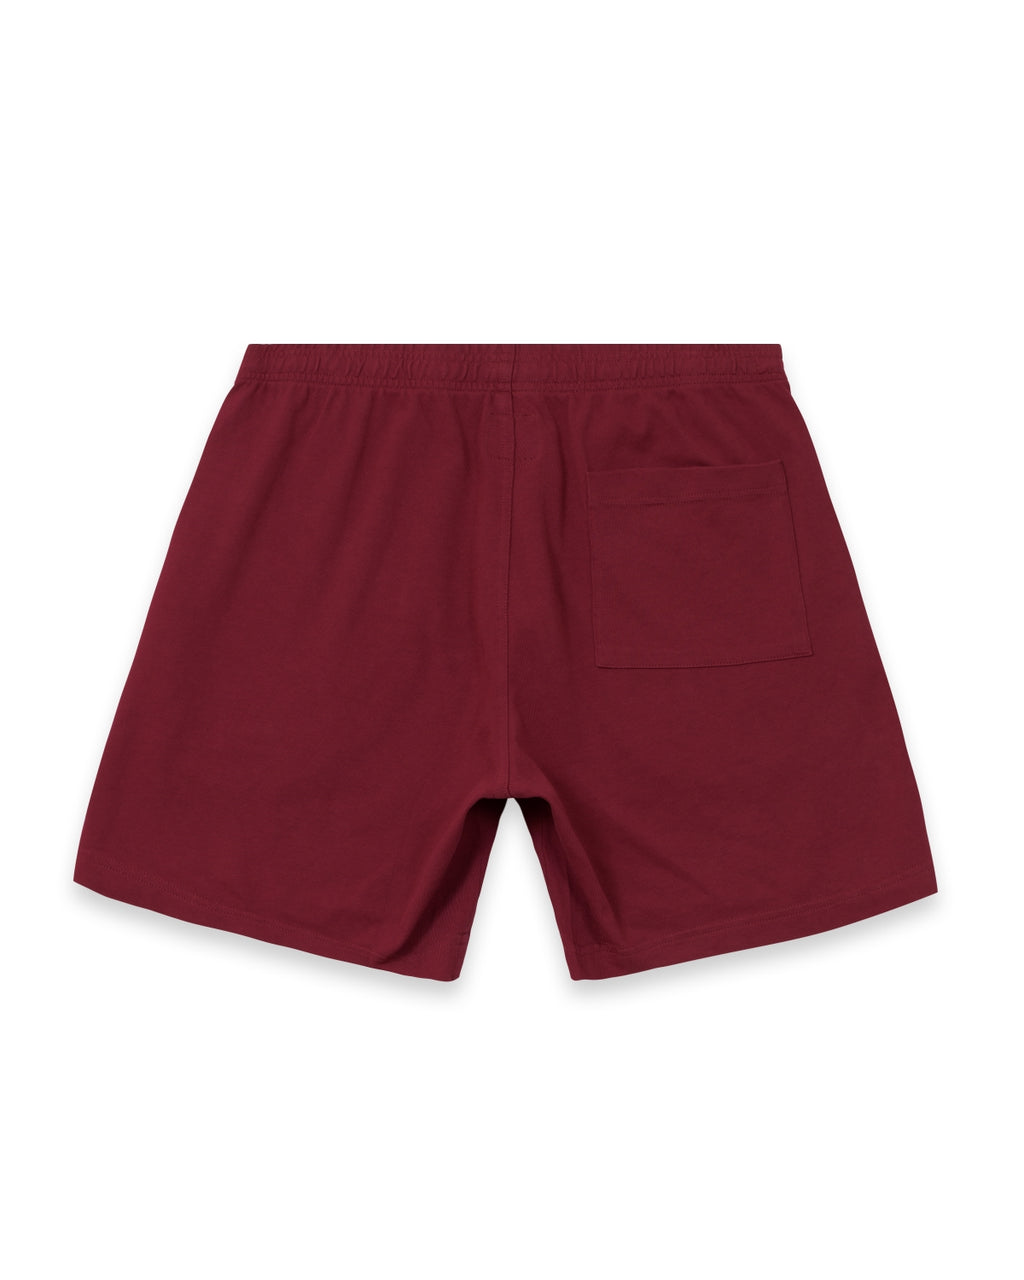 heavyweight boxer shorts - OFF-55% >Free Delivery